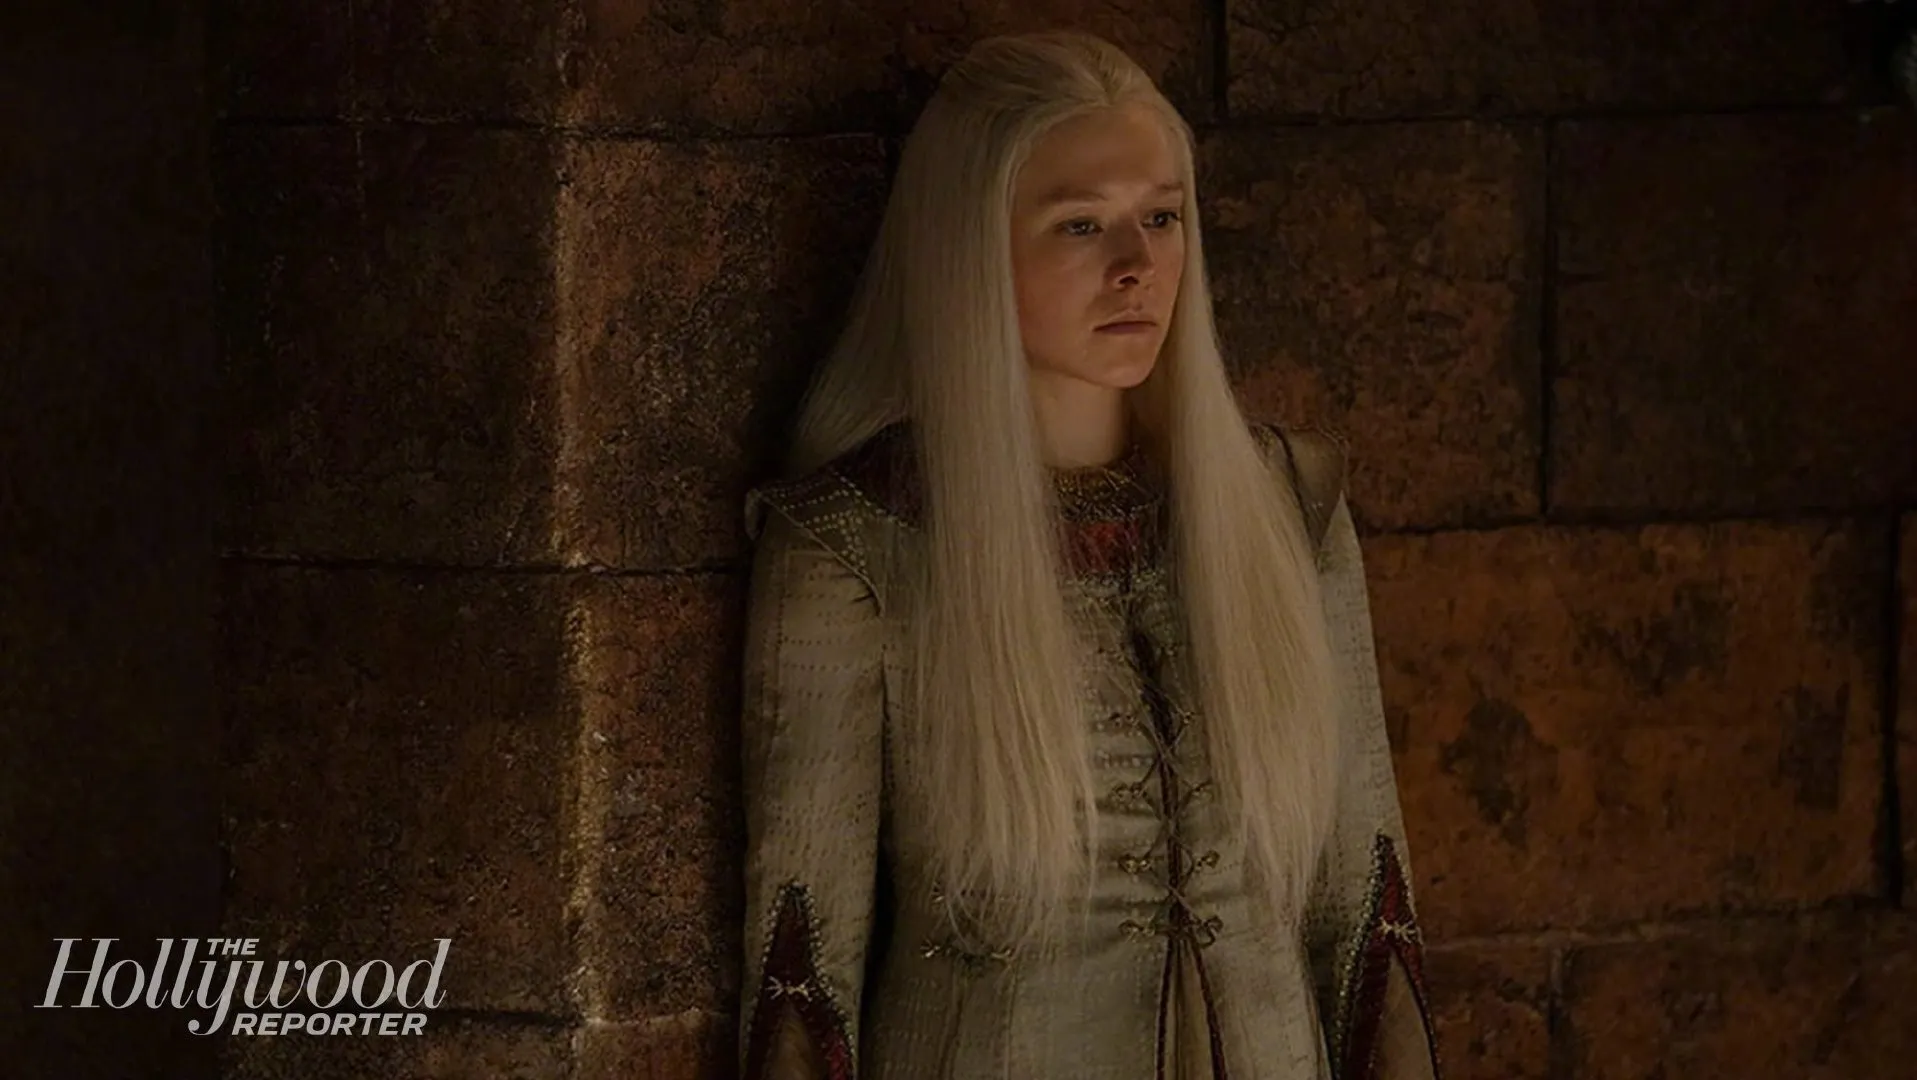 'Game of Thrones' spin-off 'House of the Dragon' releases multiple new stills | FMV6